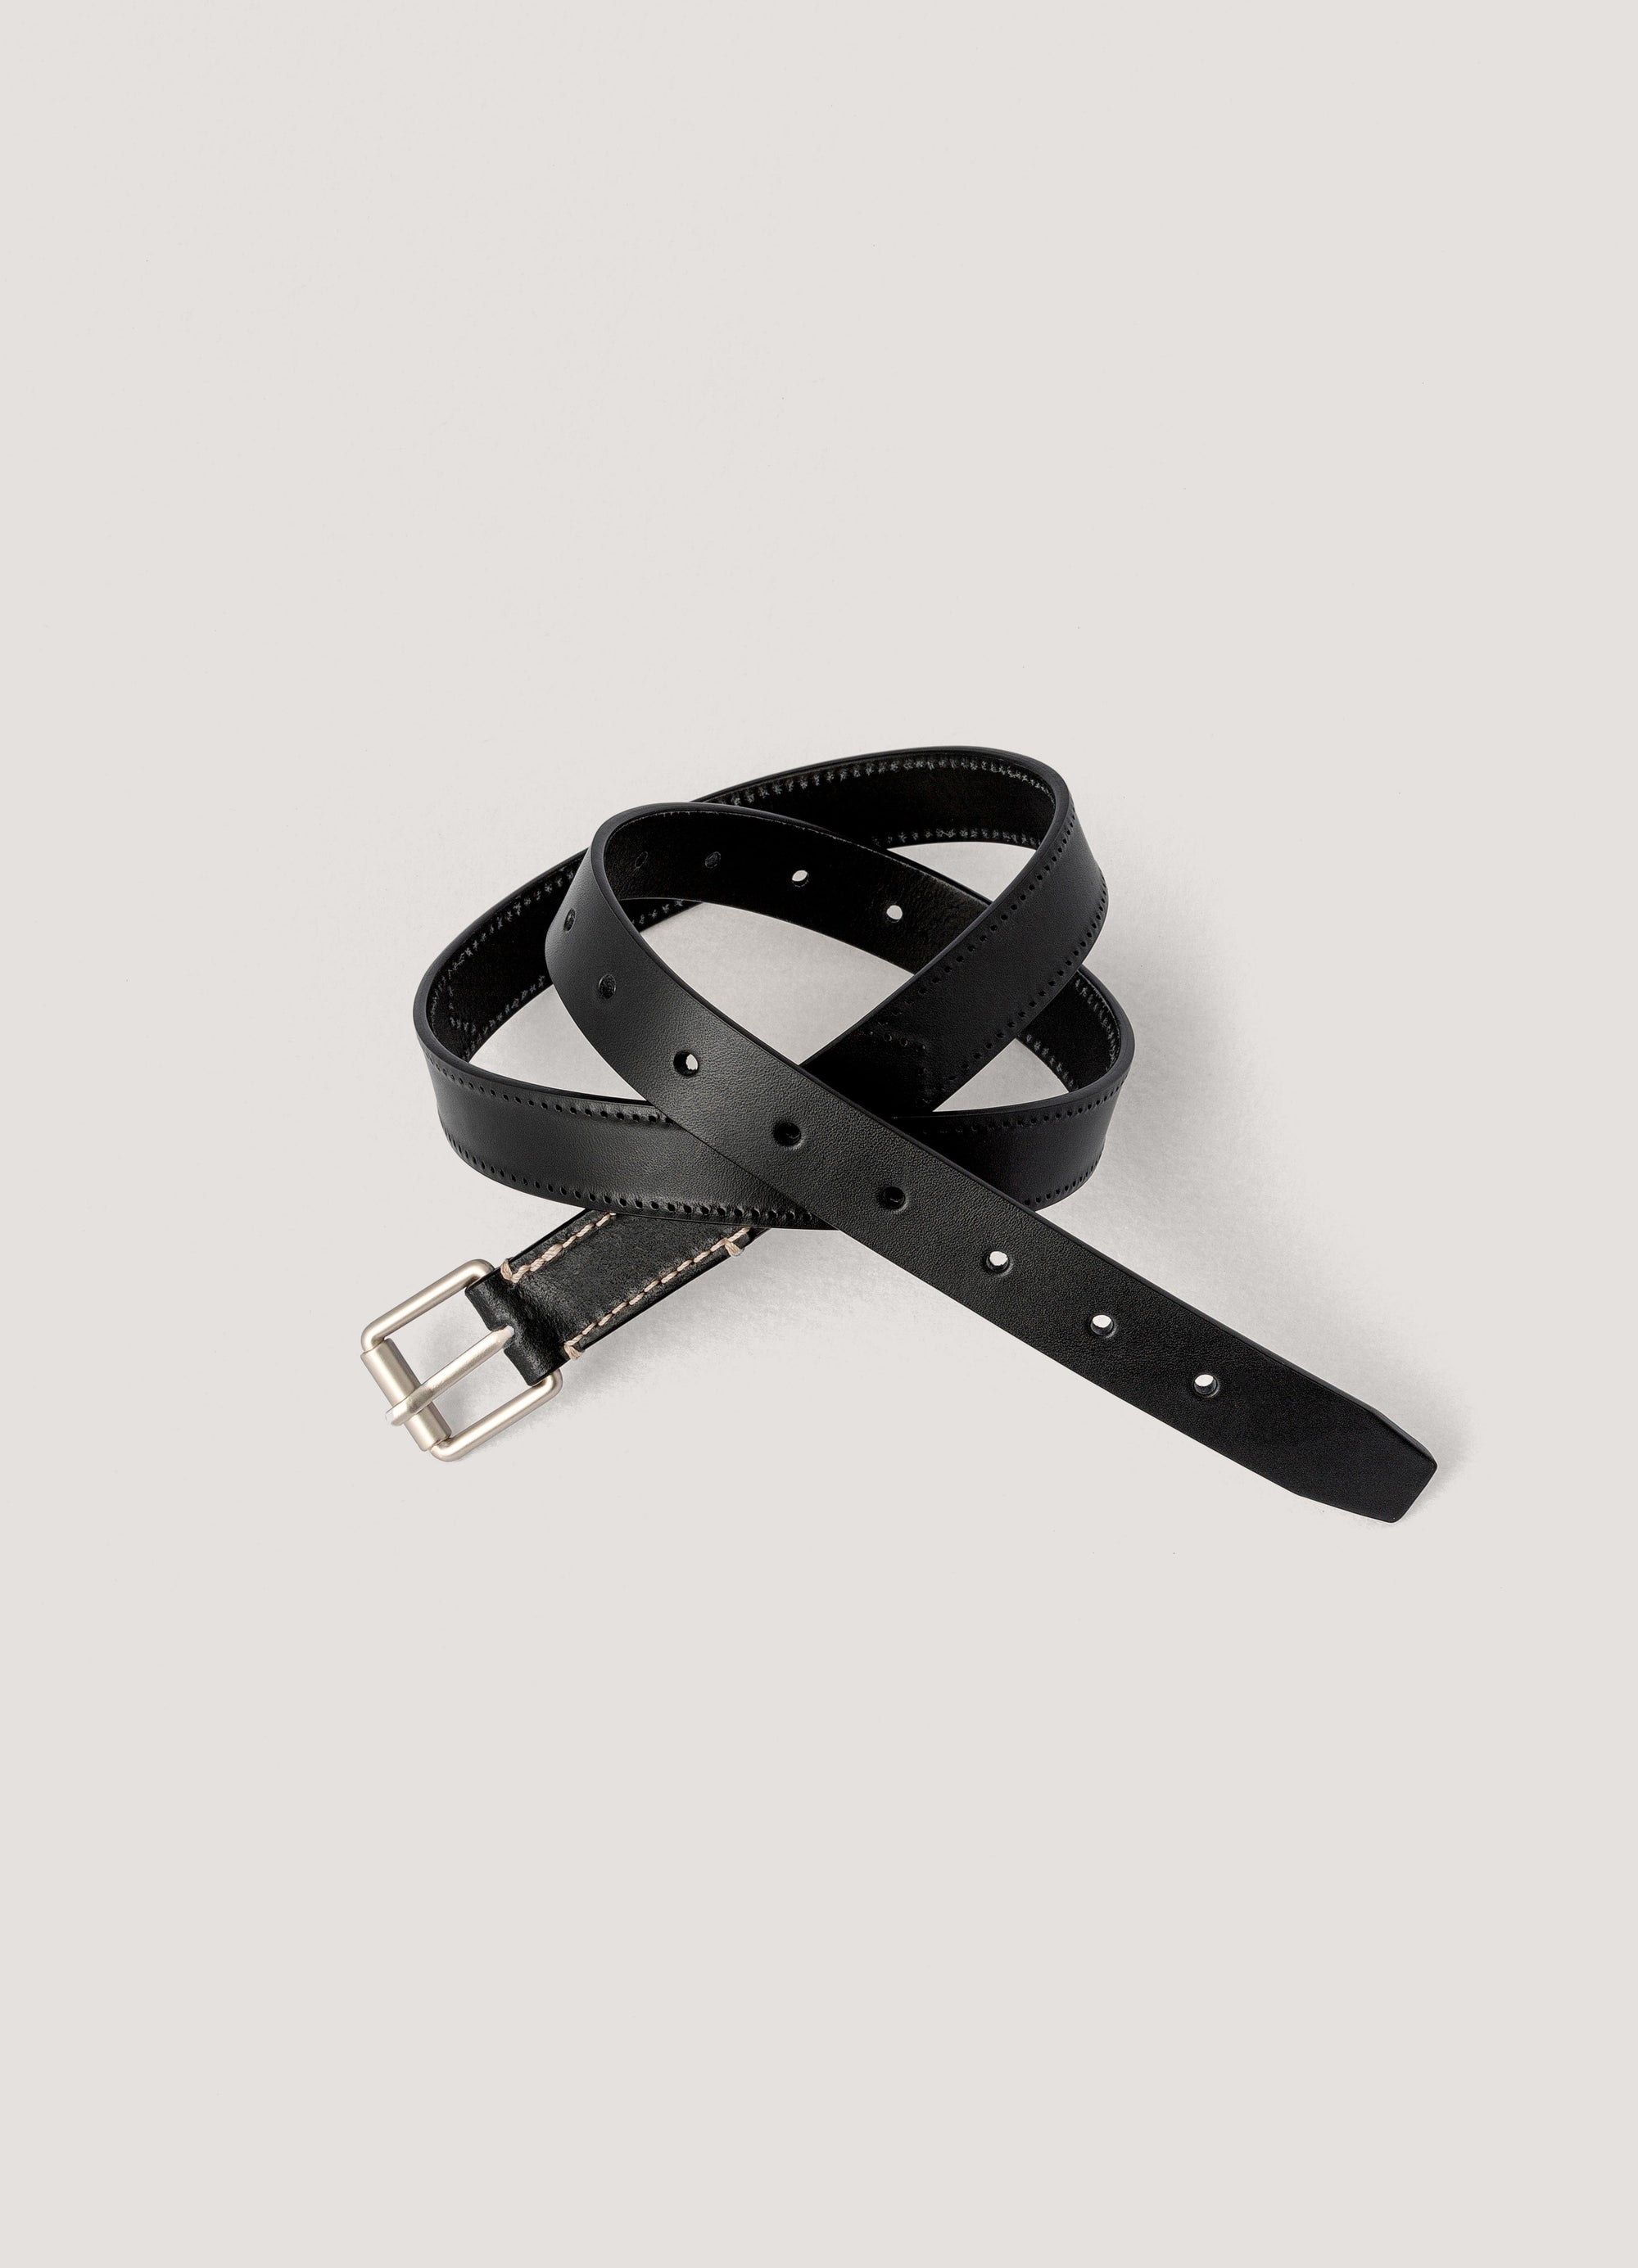 REVERSED THIN BELT
COW LEATHER - 2